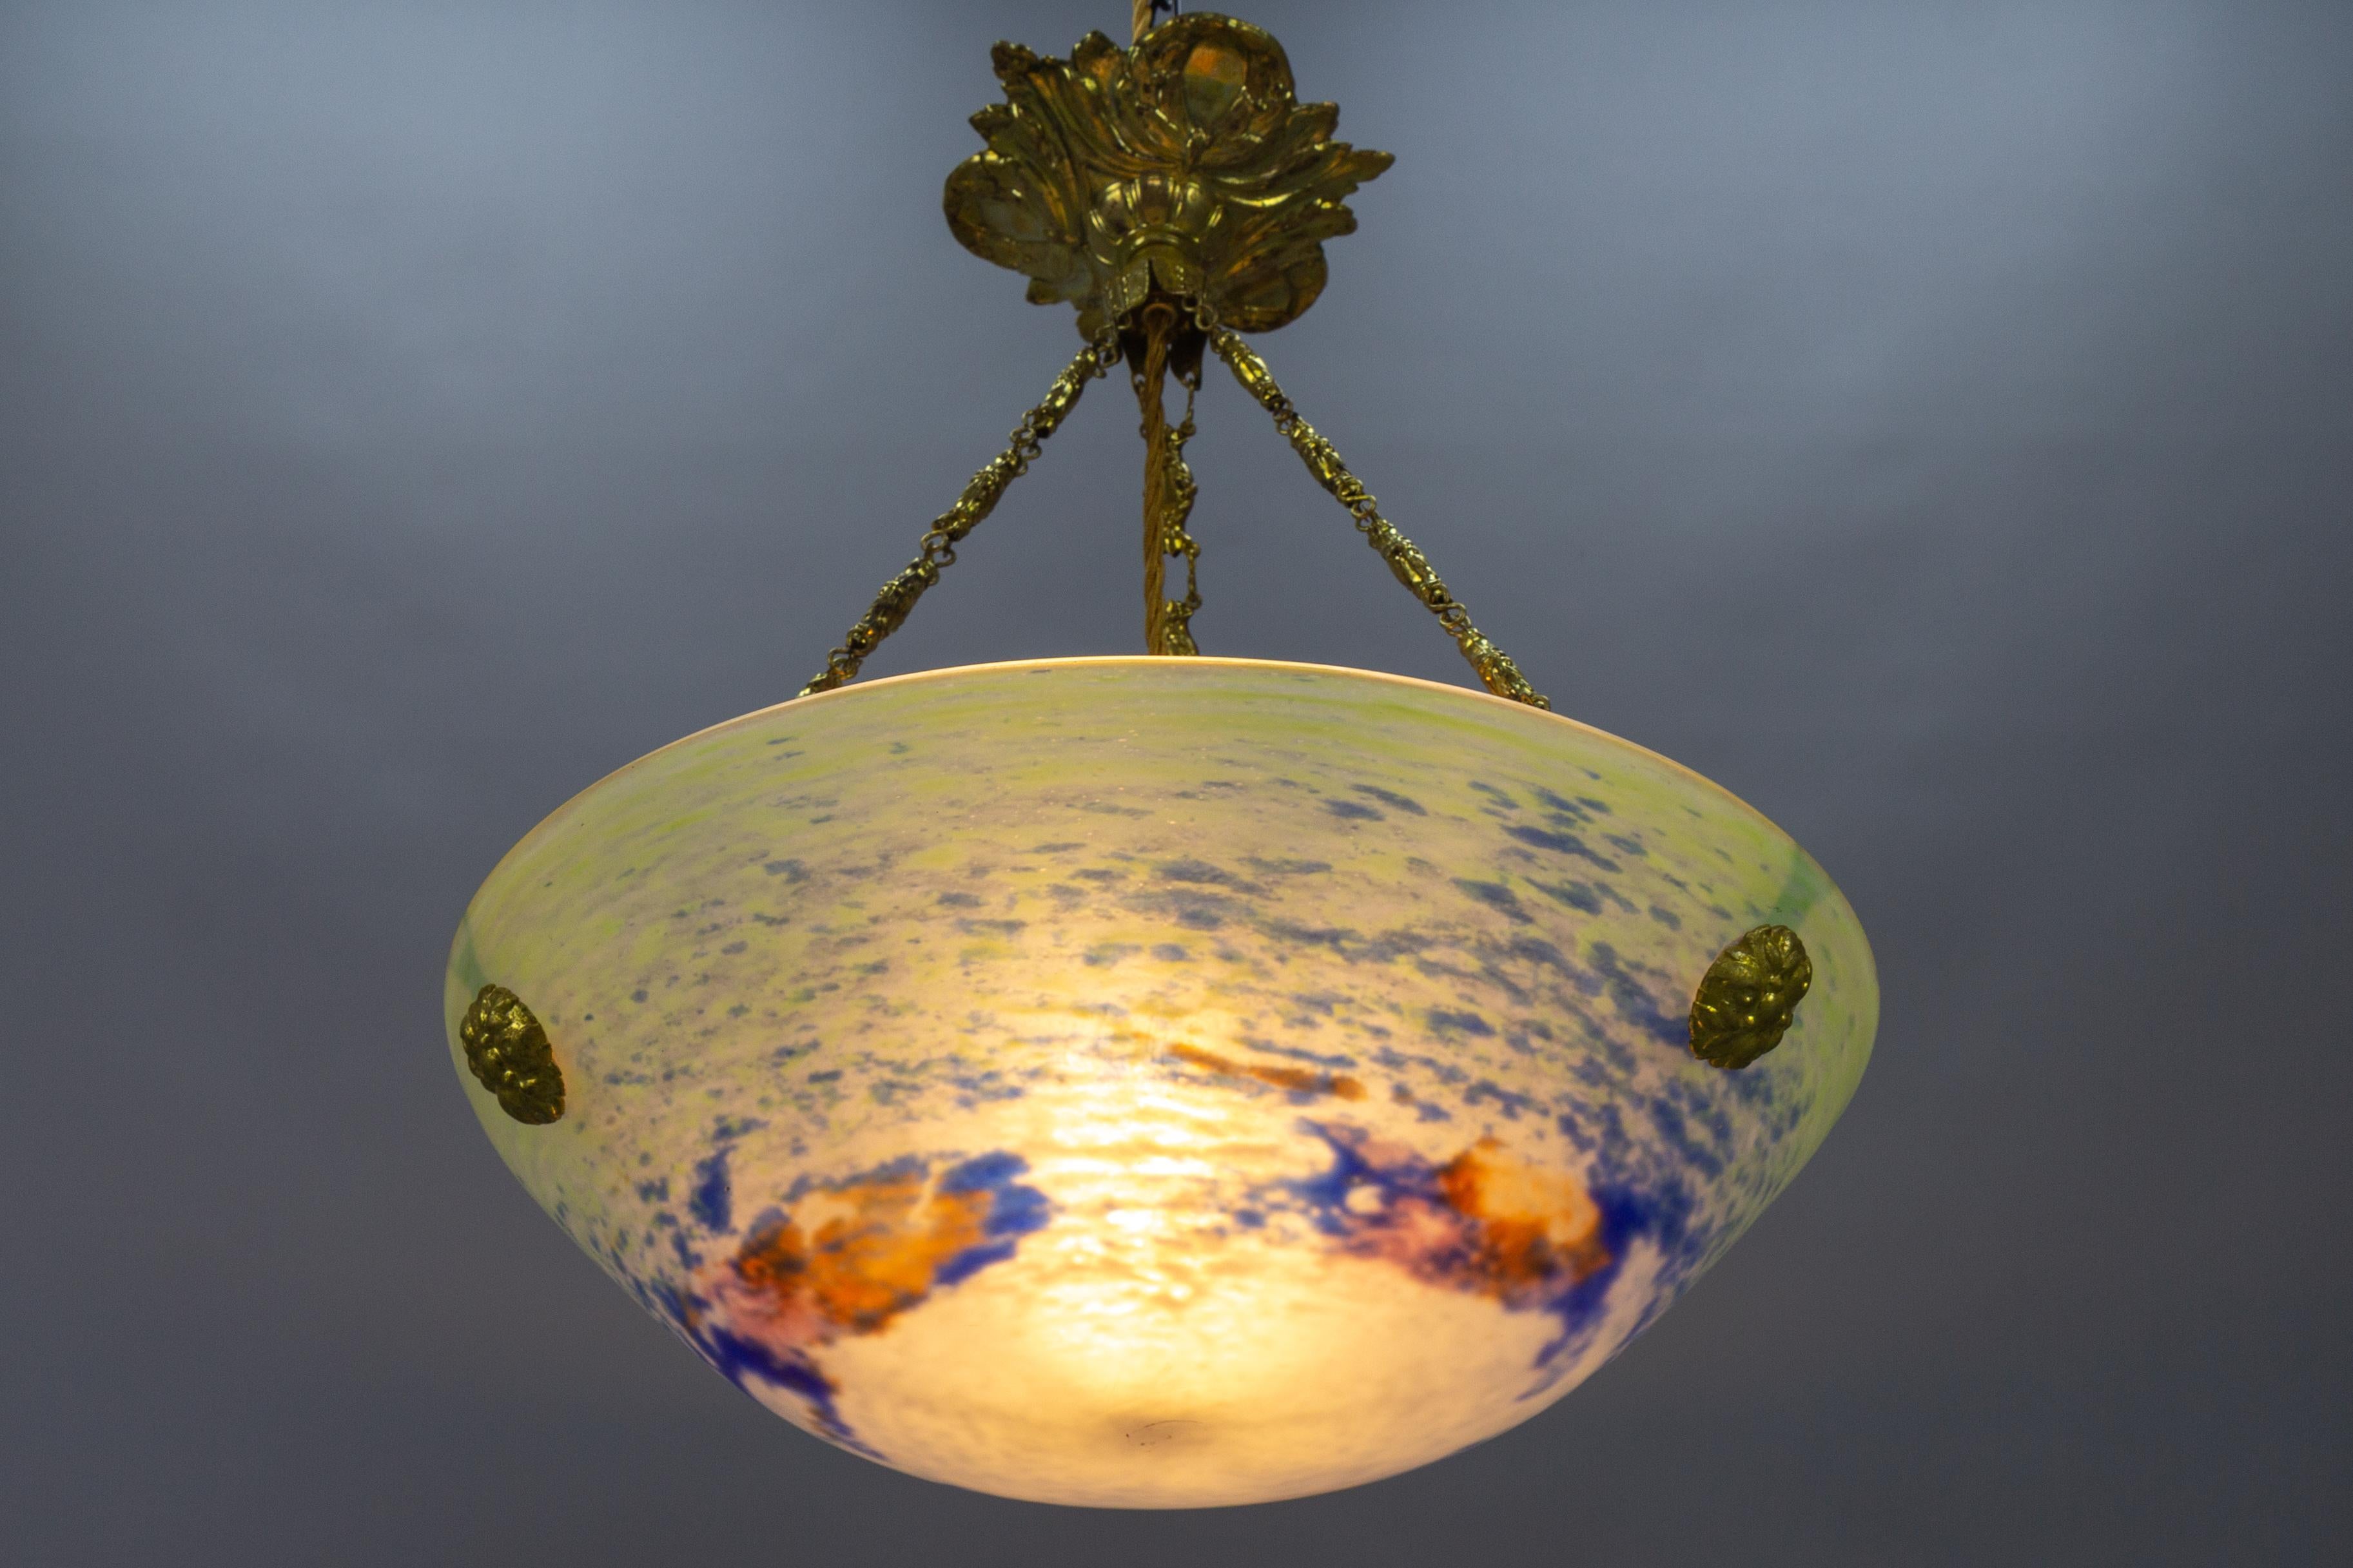 Metal French Art Nouveau Green, Blue and White Glass and Brass Pendant Light, 1920s For Sale